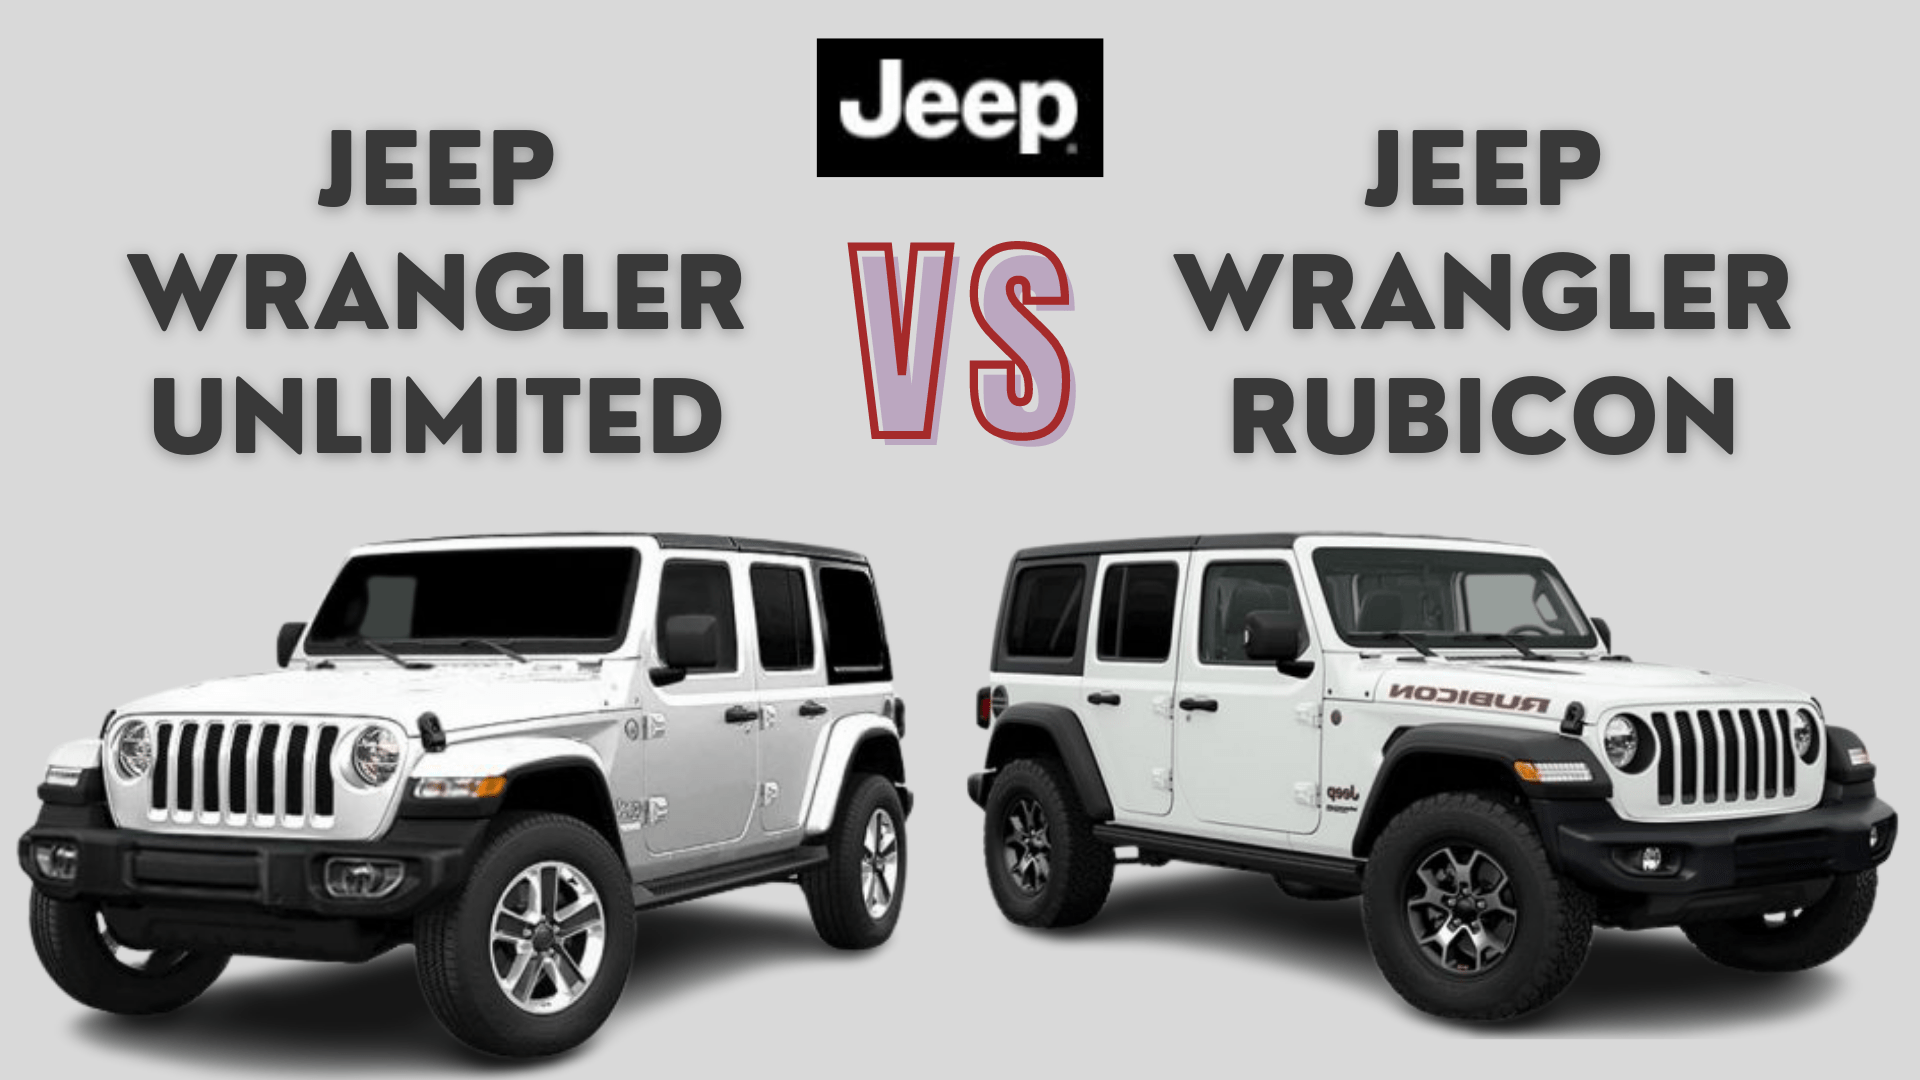 Arriba 113+ imagen what is the difference between rubicon and wrangler